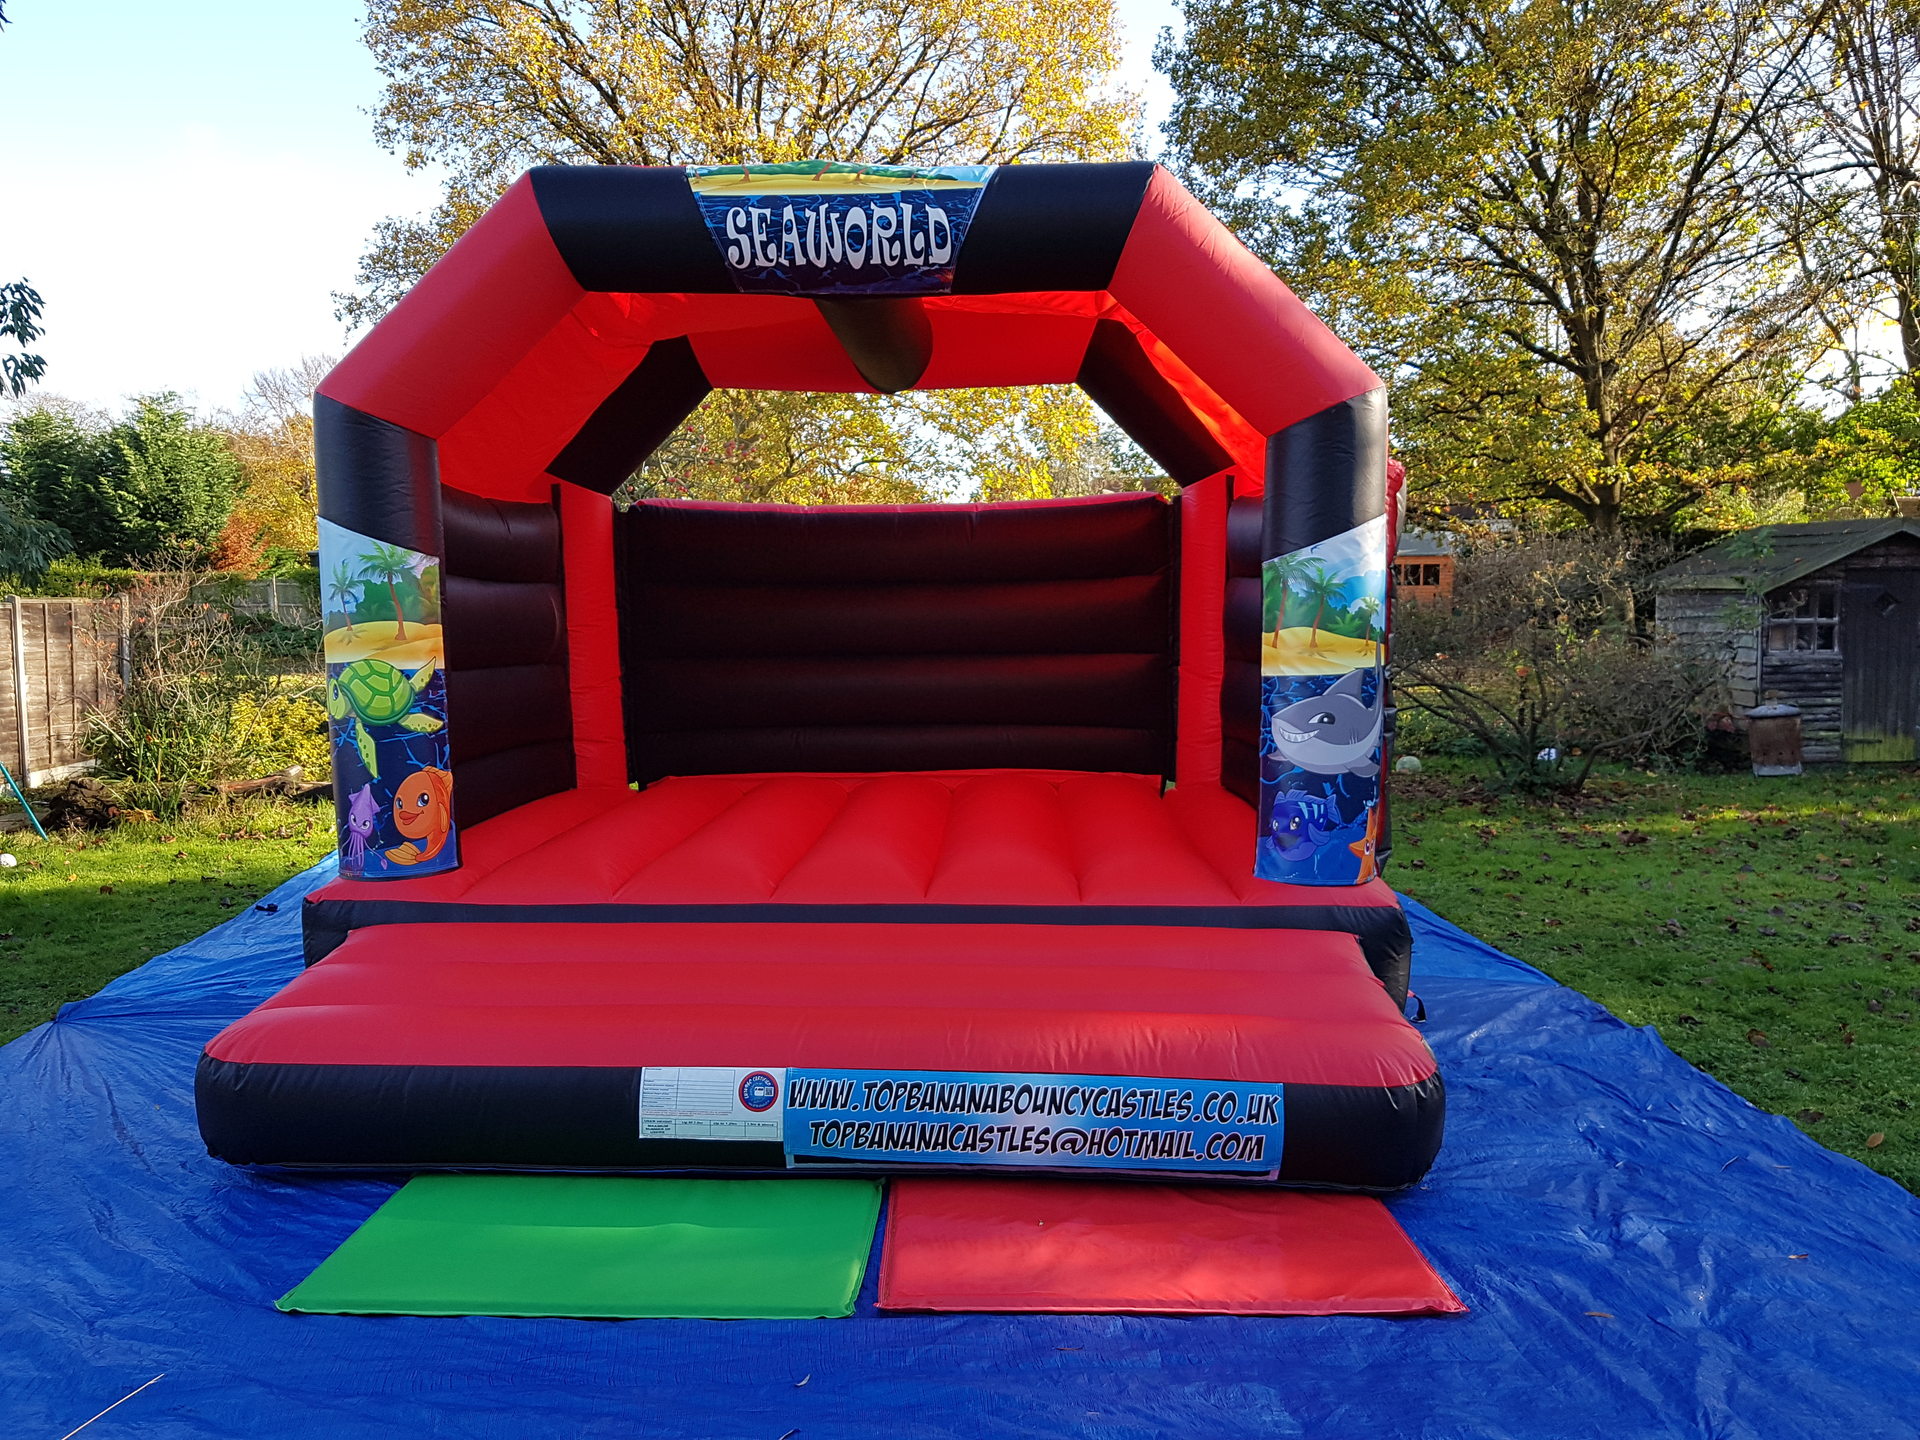 adult red and black bouncy castle with seaworld theme